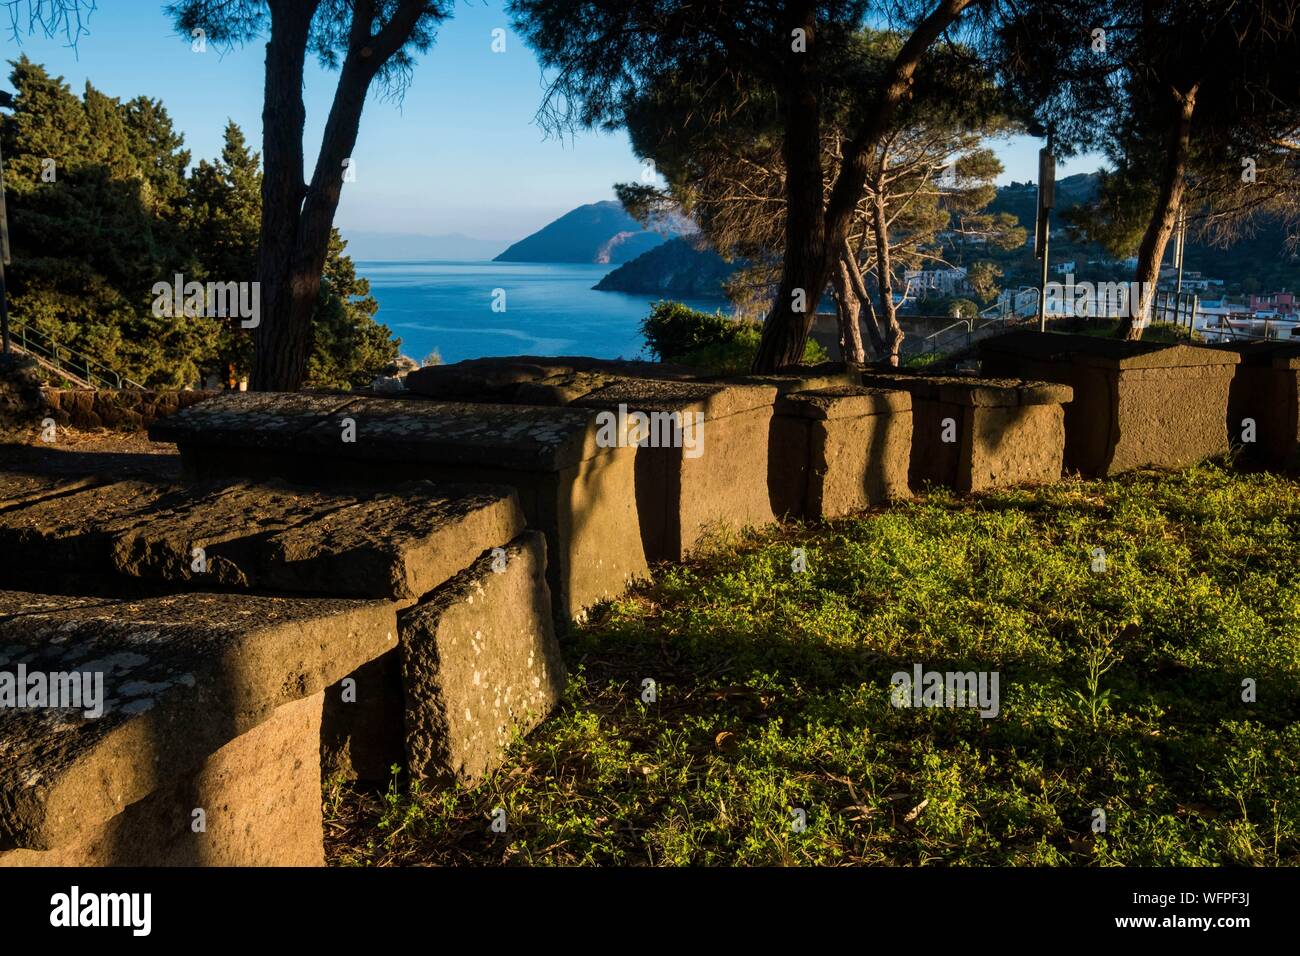 Italy, Sicily, Eolian Islands listed as World Heritage by UNESCO, Lipari, Greek-Roman sarcophagi (4th-2nd centurry B.C.) in the citadel's gardens Stock Photo